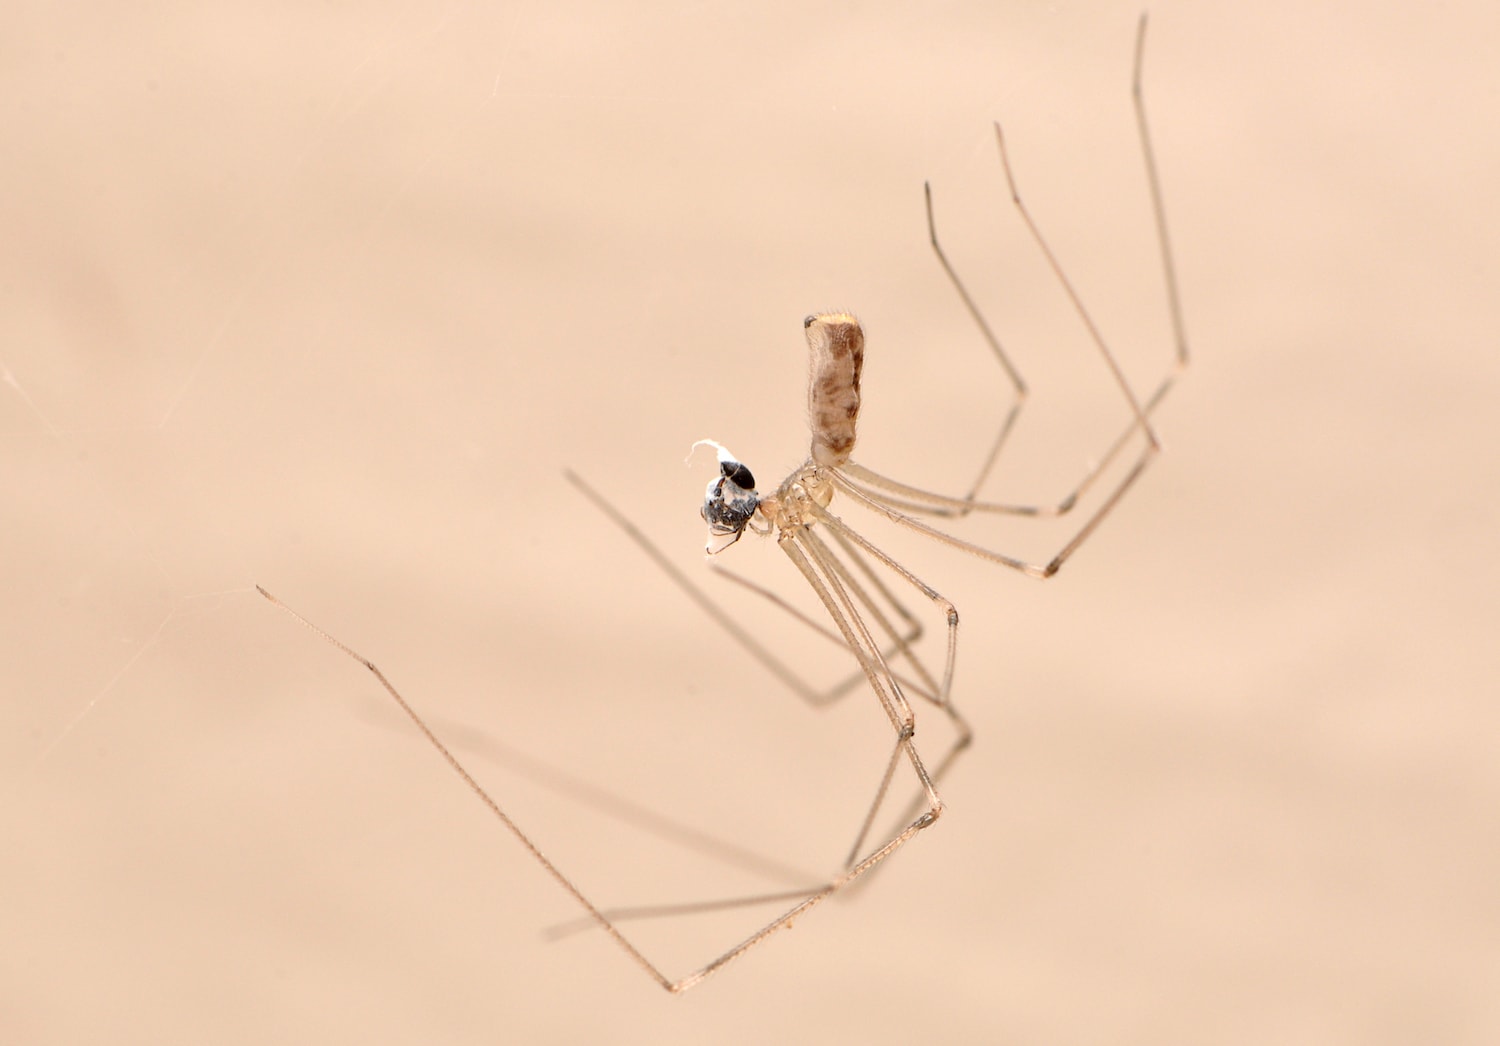 Researchers discover daddy longlegs spiders capture prey using glue